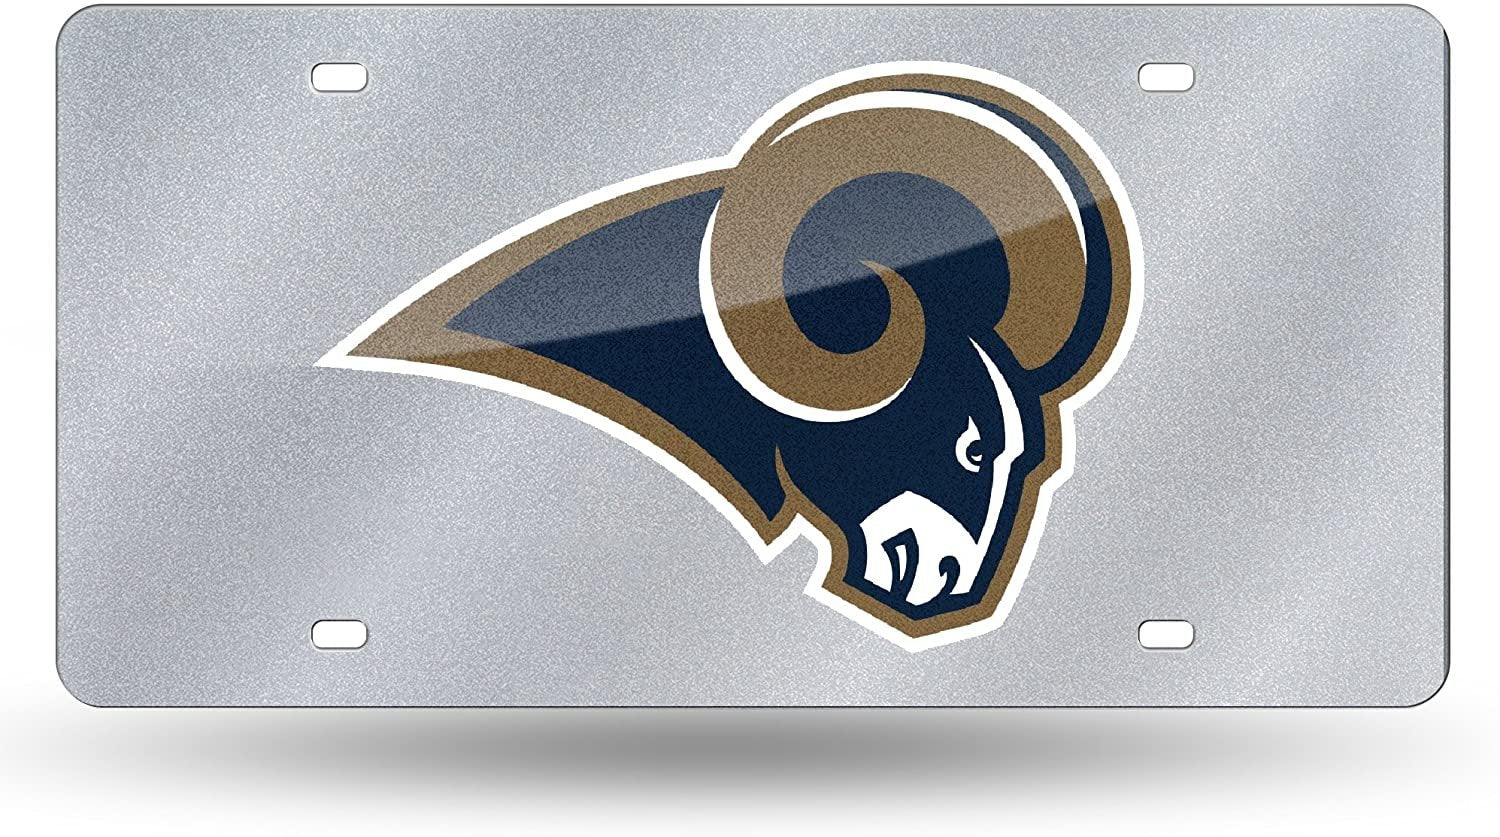 Los Angeles Rams Premium Laser Cut Tag License Plate, Bling Style, Mirrored Acrylic Inlaid, 12x6 Inch